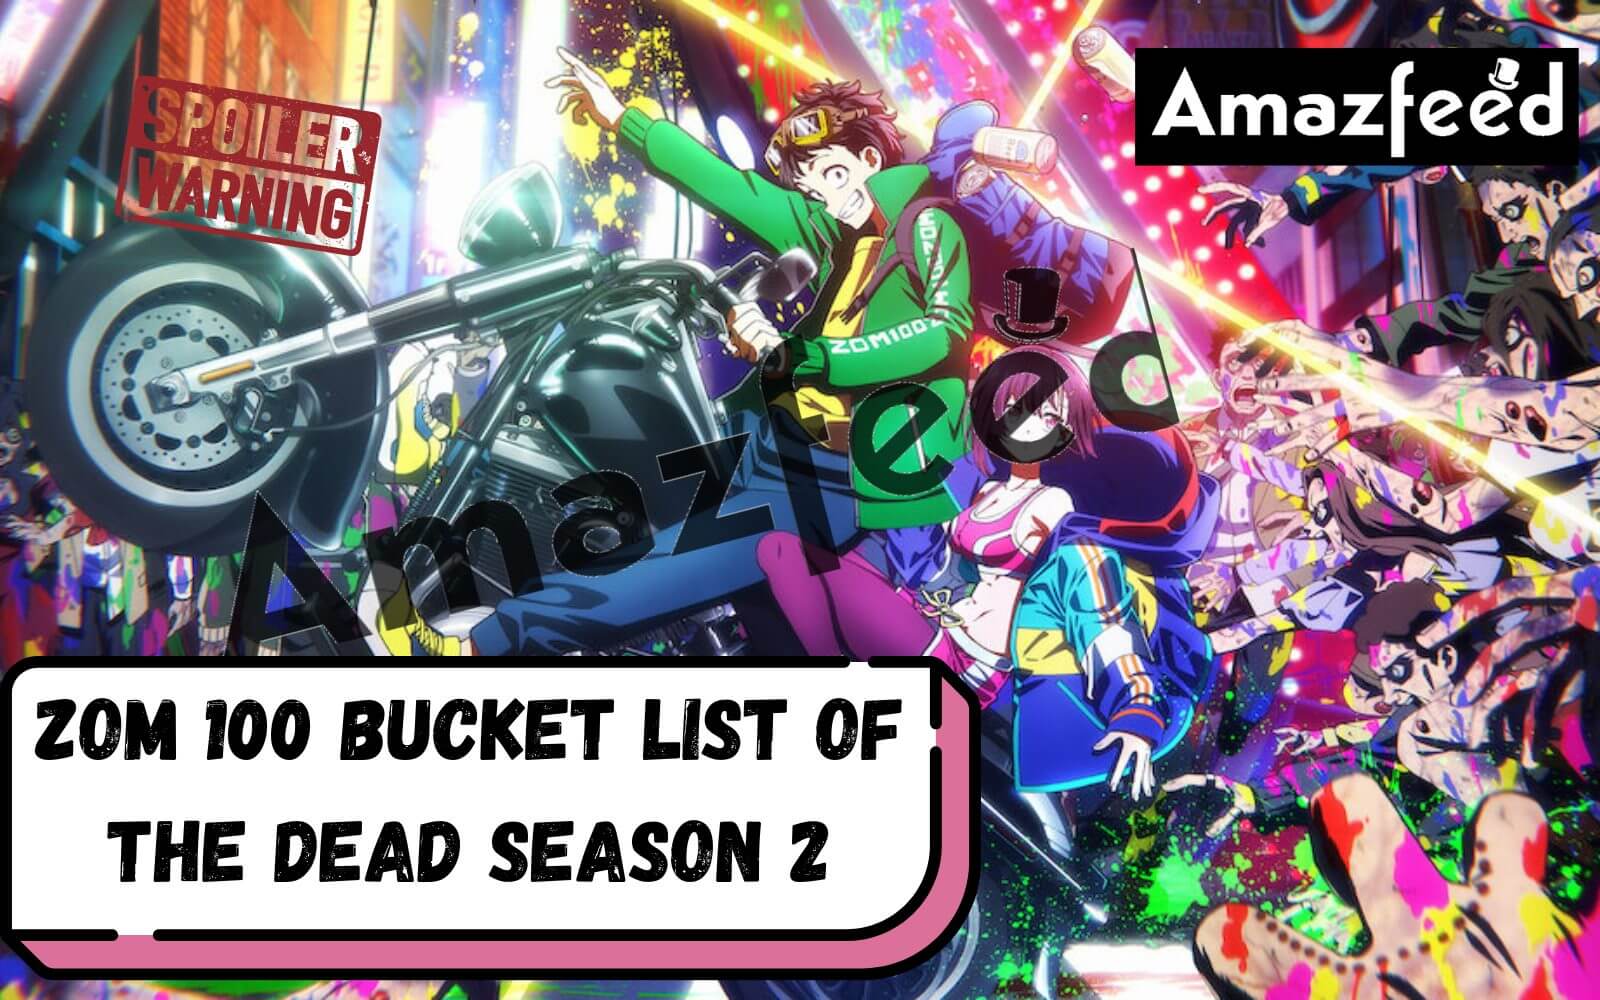 Zom100 Bucket List of the dead is here. Give up on season 2 of Highsch